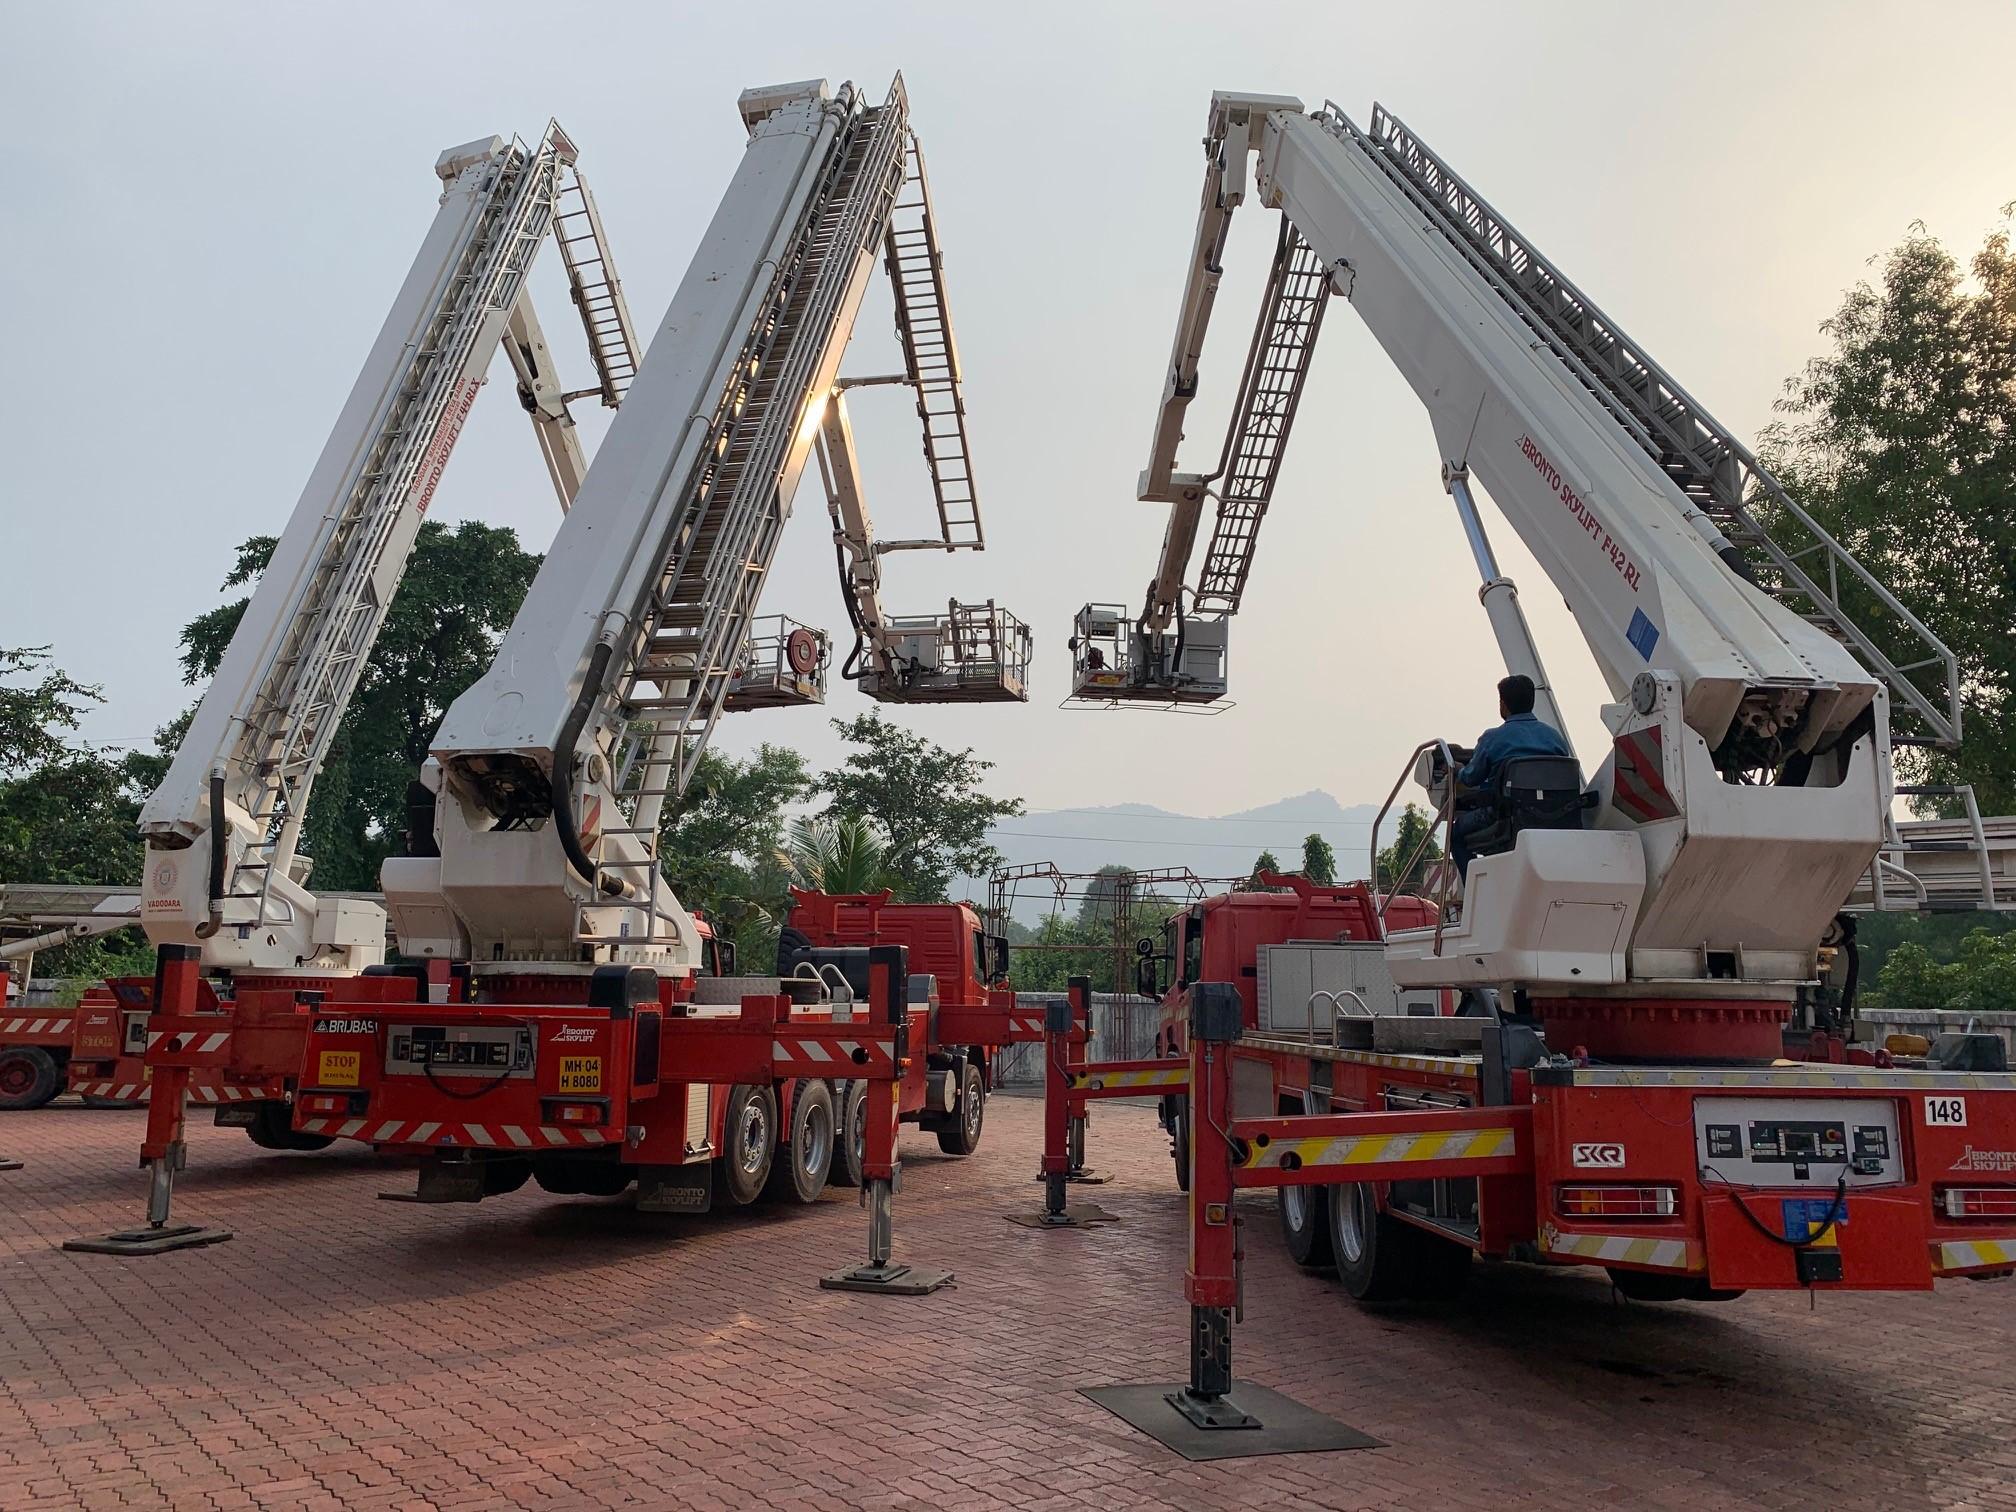 Bronto aerial ladder platforms at annual maintenance in India